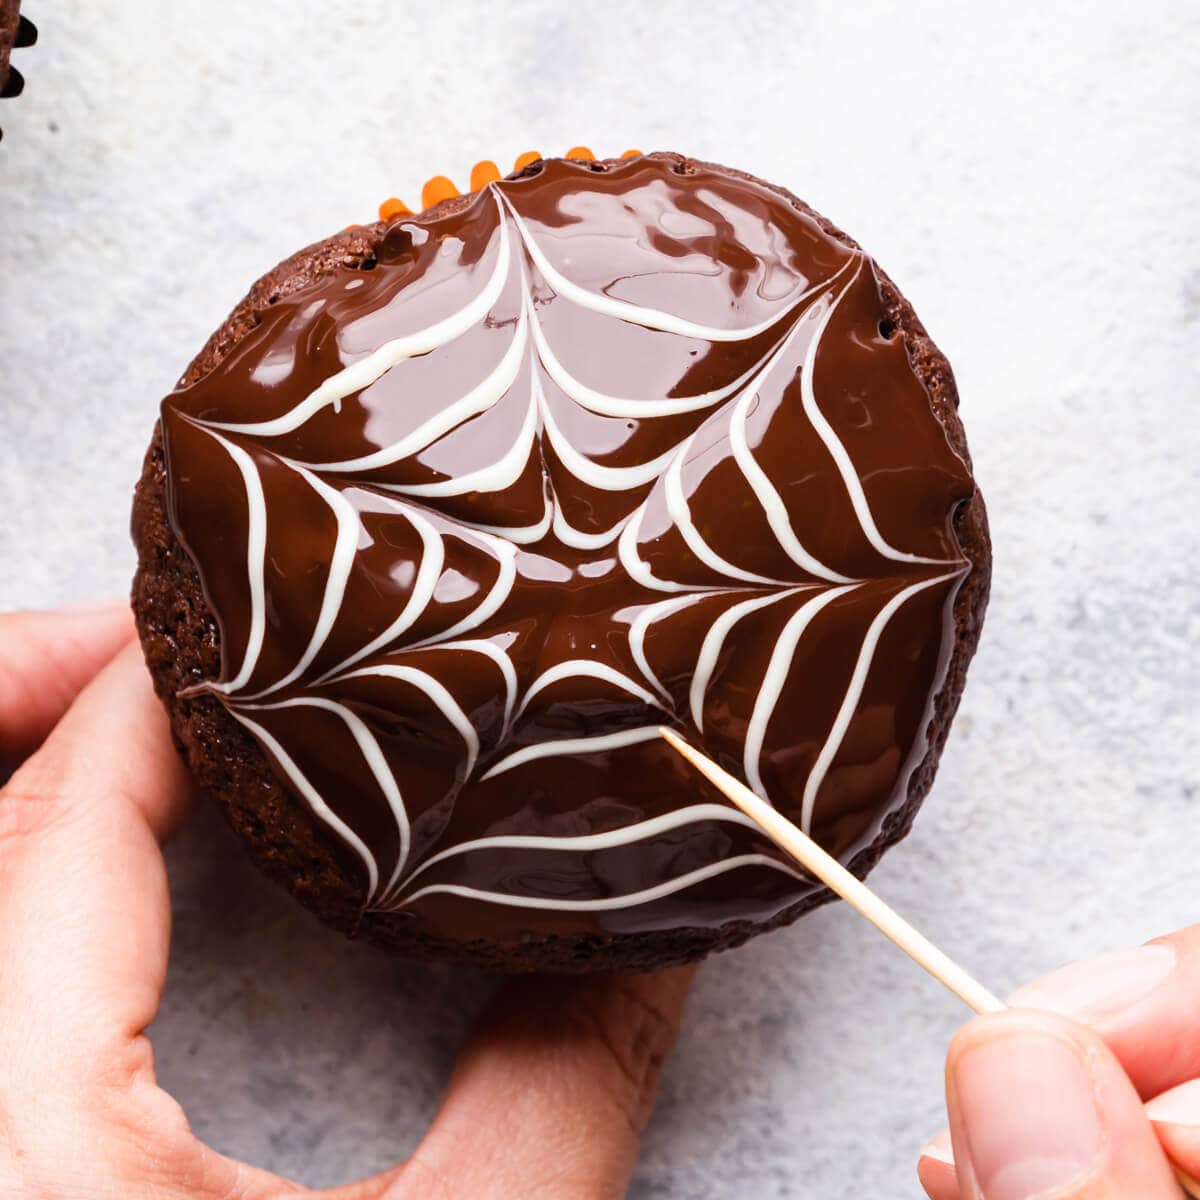 a chocolate web decoration in the making on top of the chocolate muffin.